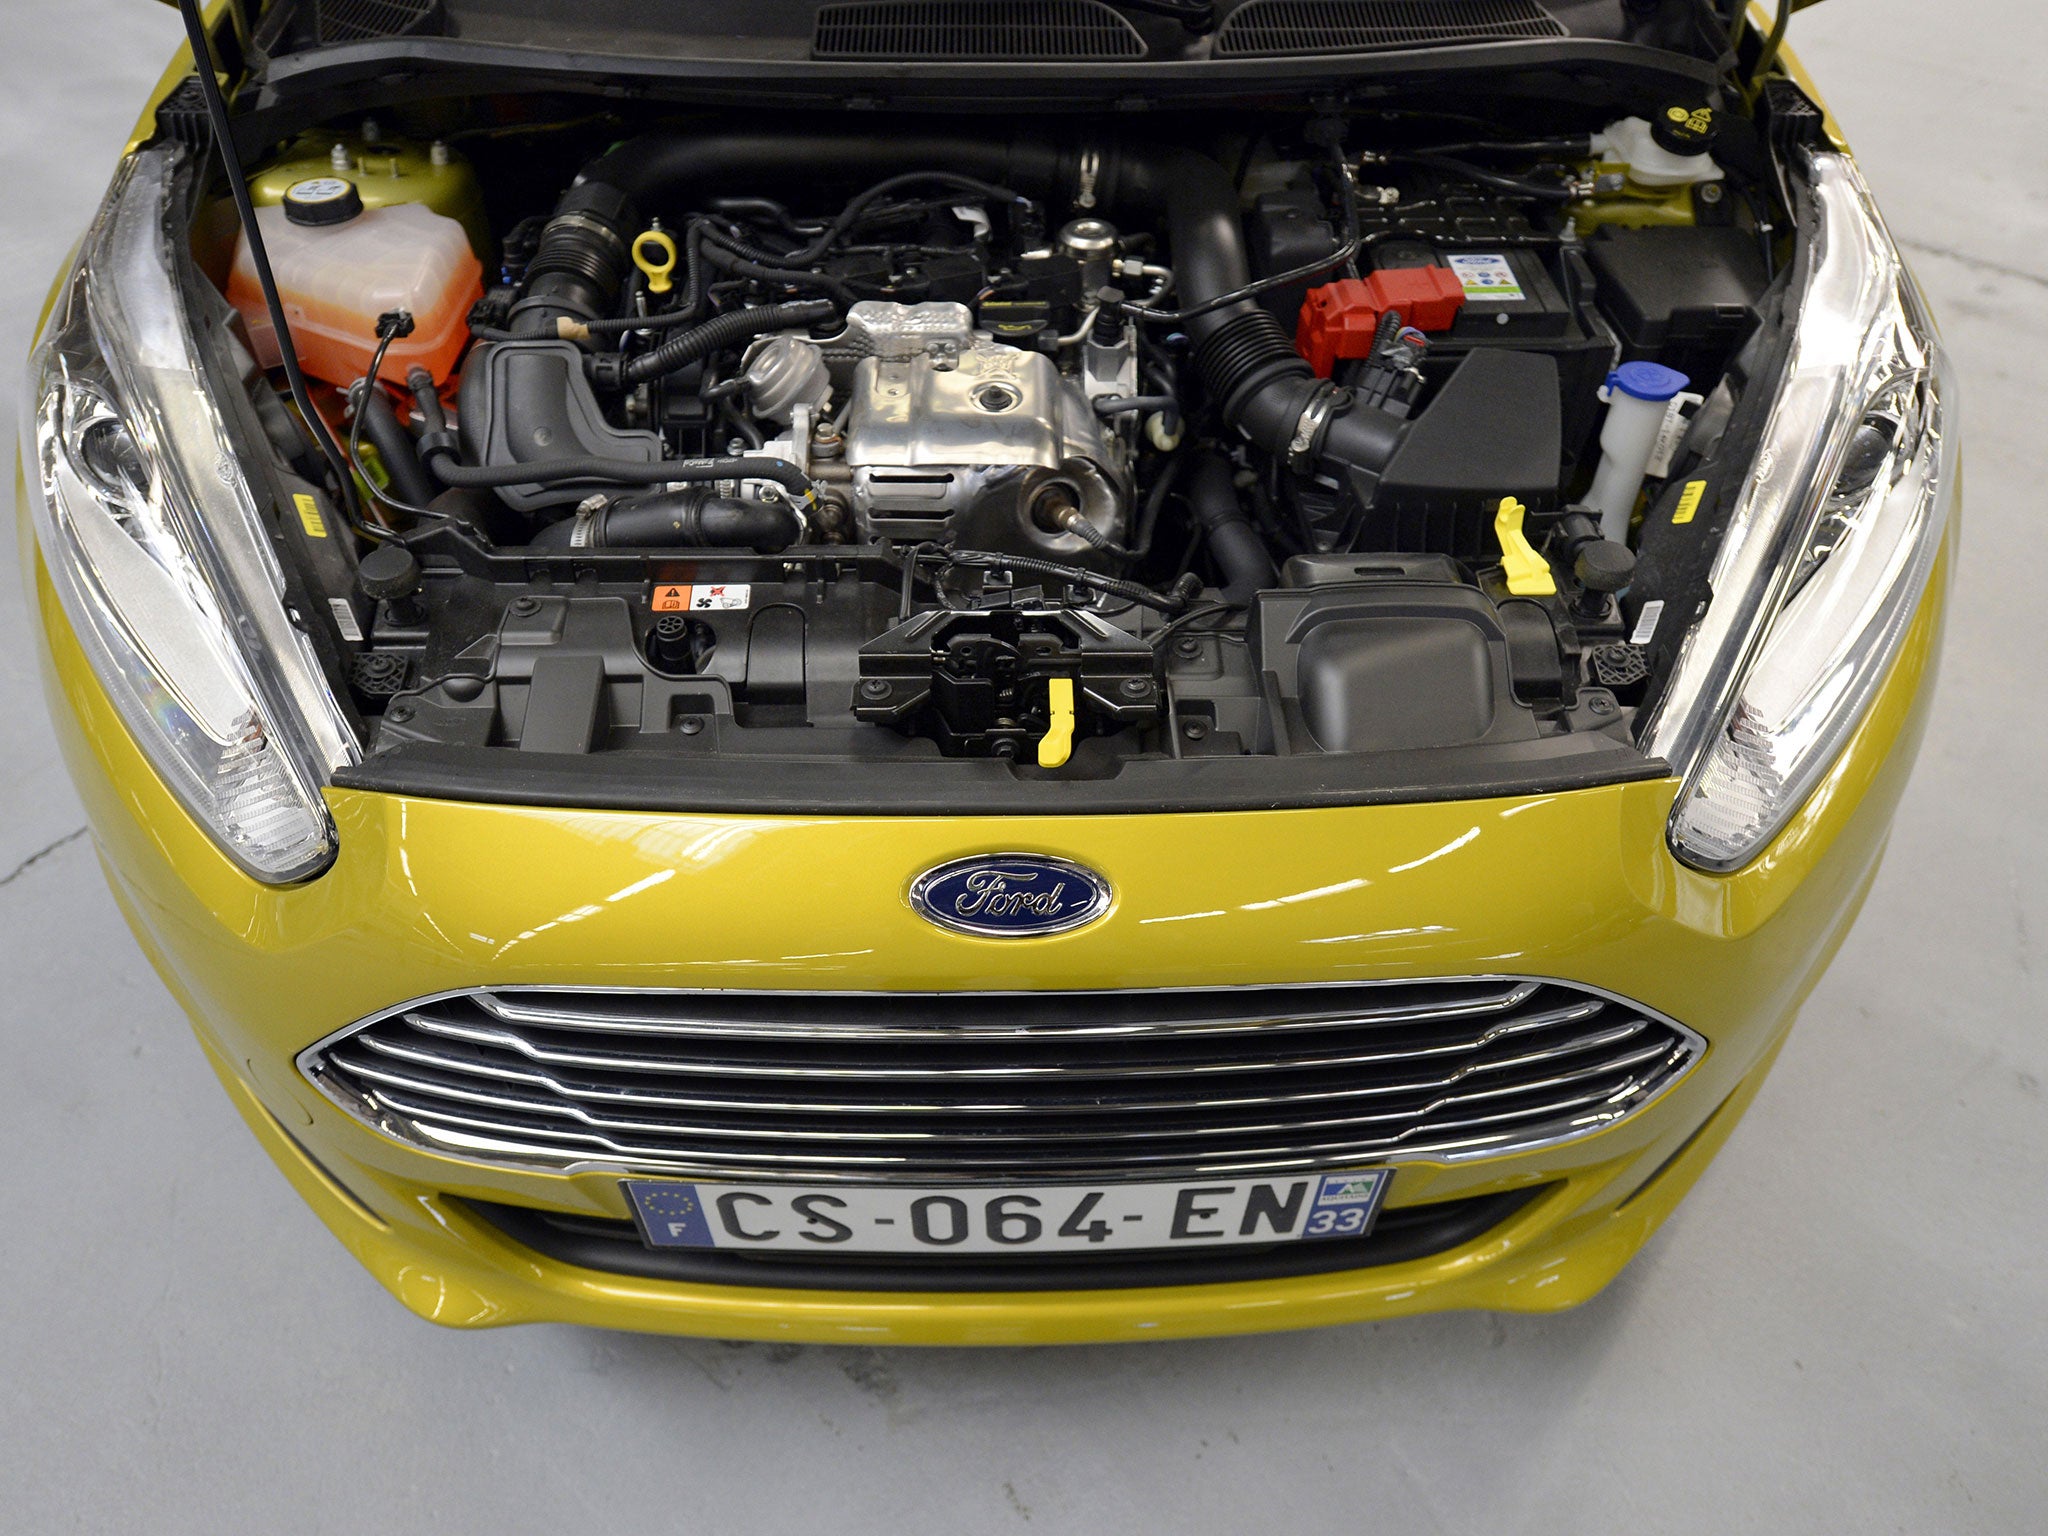 One in six drivers cannot identify a single one of the main components found under the bonnet of an average car